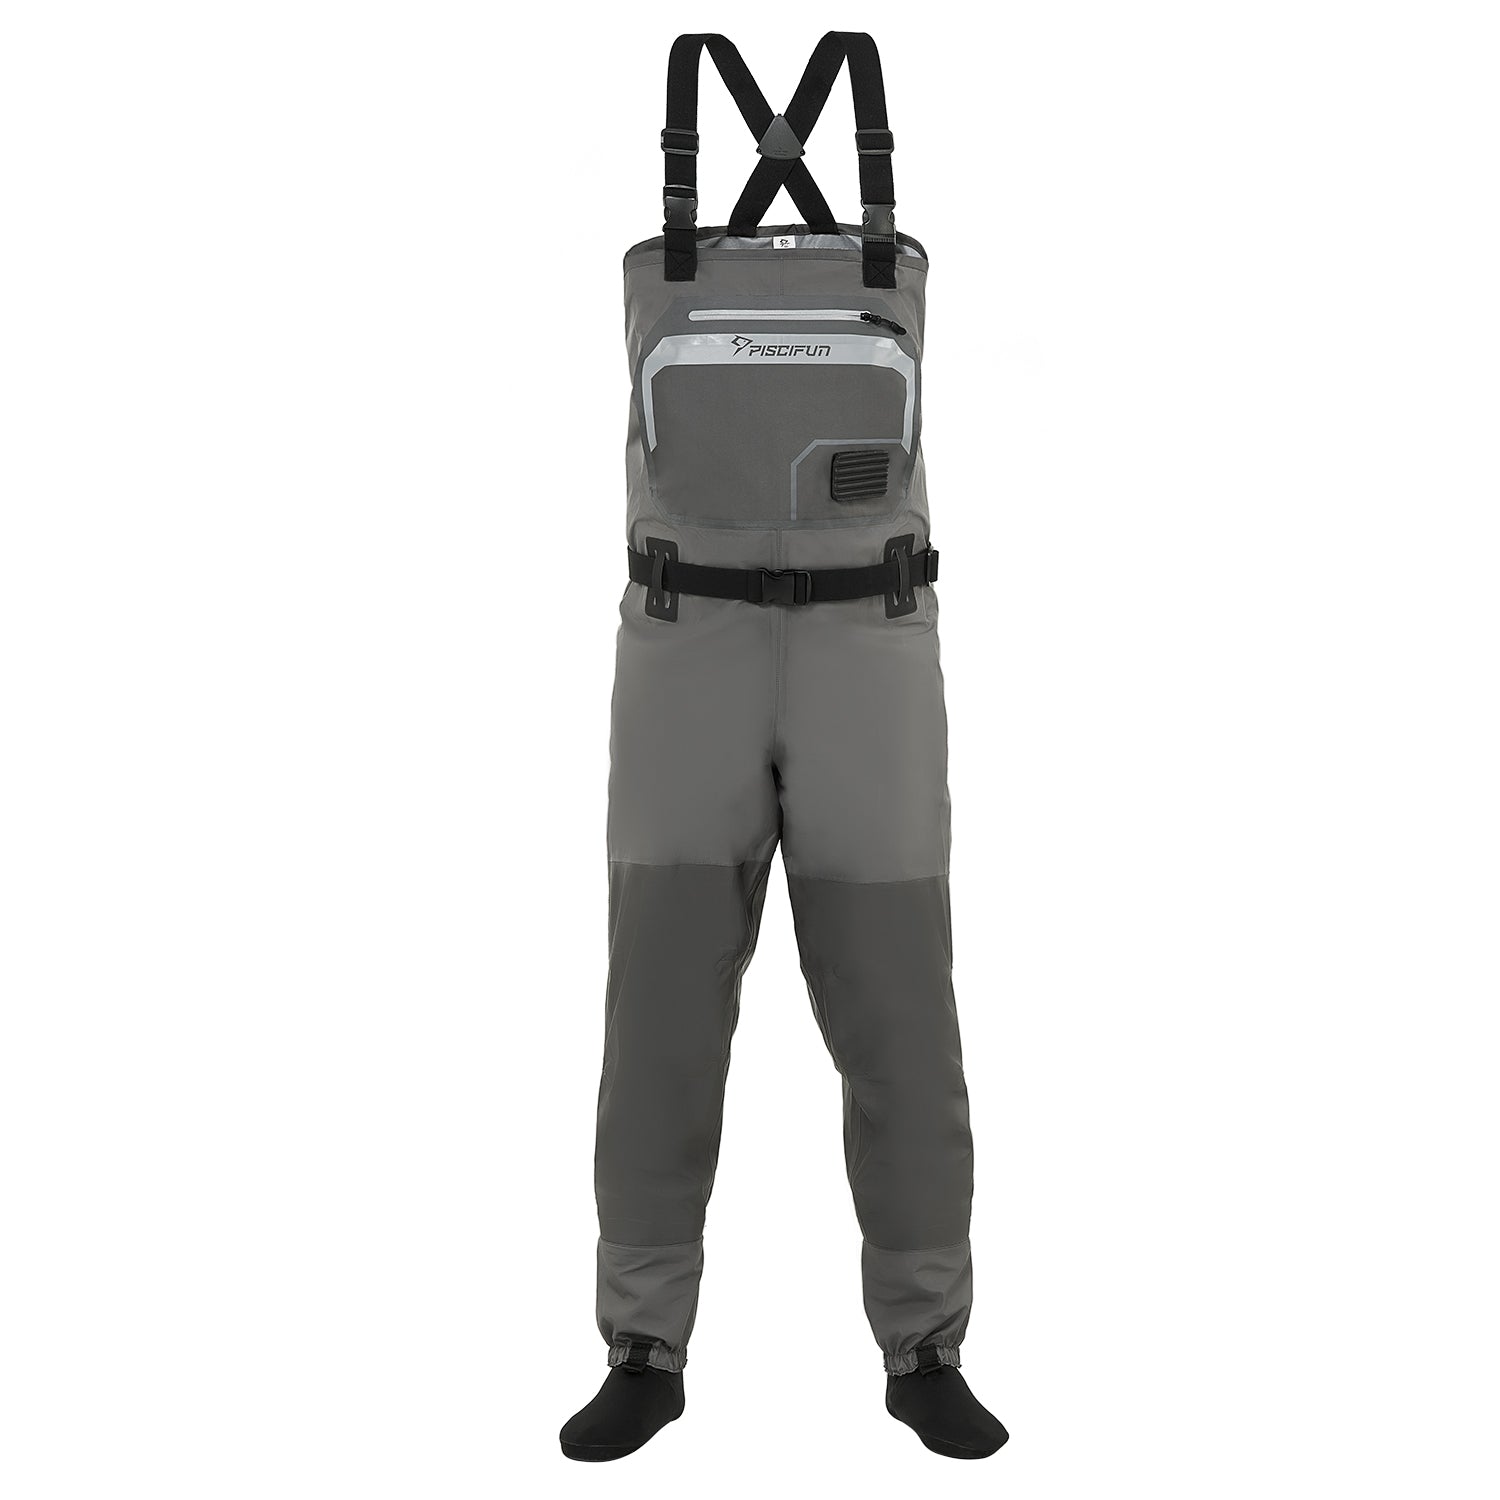 Lipstore Outdoor Fishing Wader With Stocking Foot Waterproof Chest Wader L, Xl, Xxl Other L